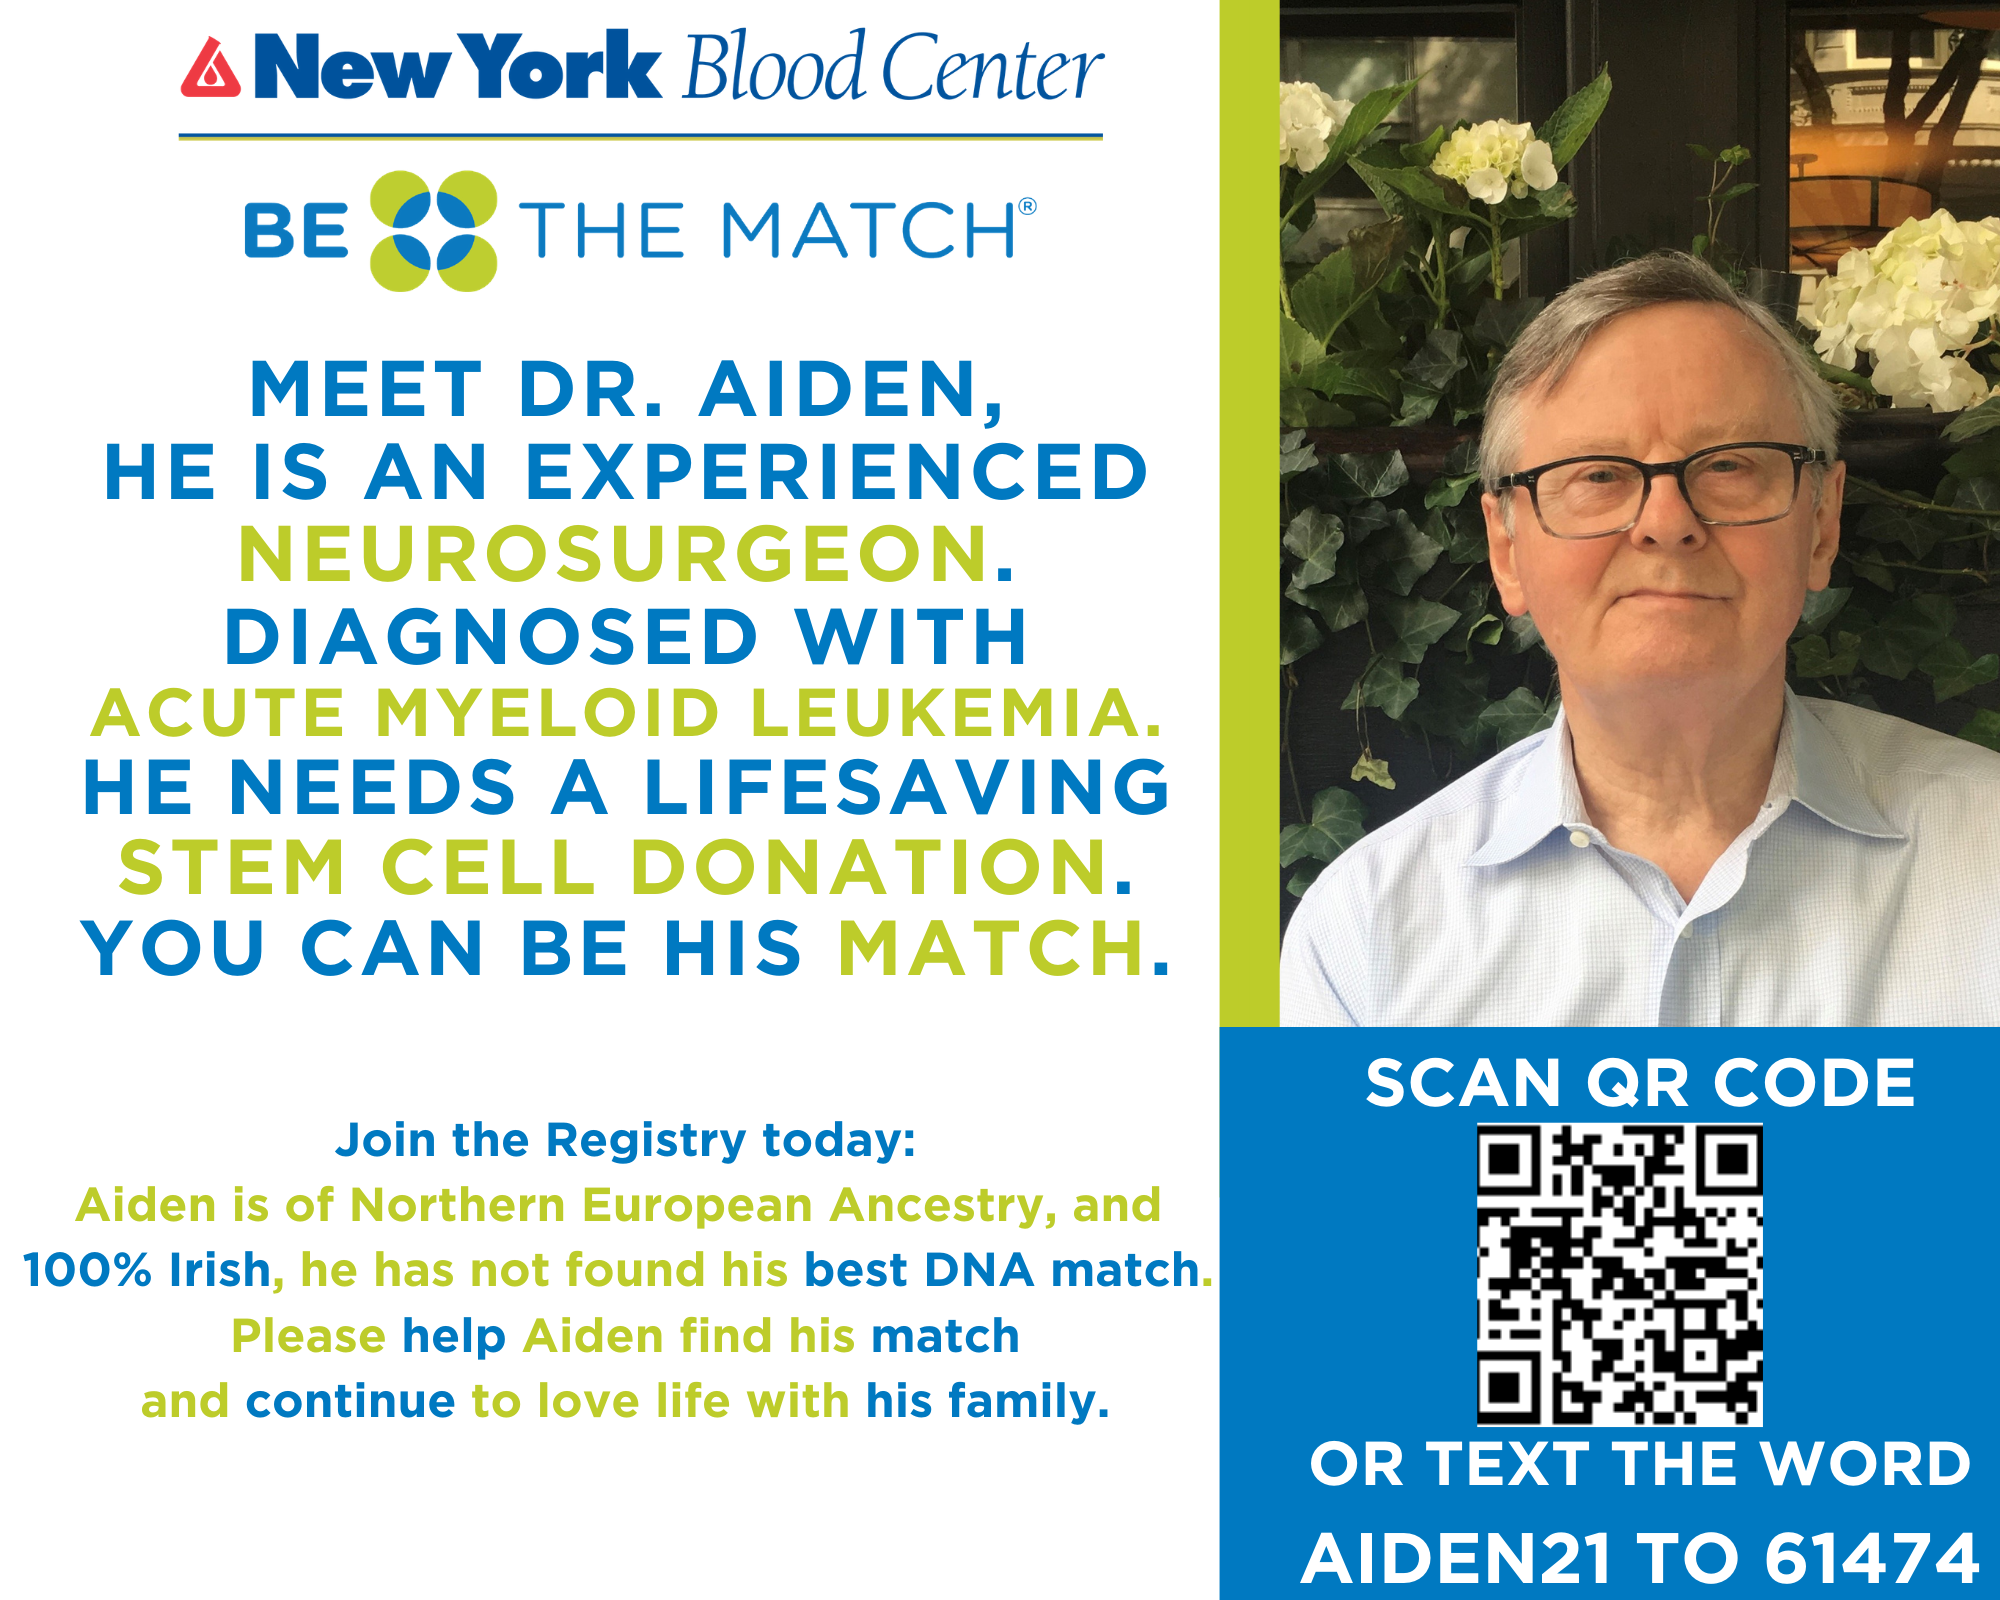 Poster featuring Dr. Aiden with a QR code inviting people to meet him because he needs a lifesaving Stem Cell Donation.